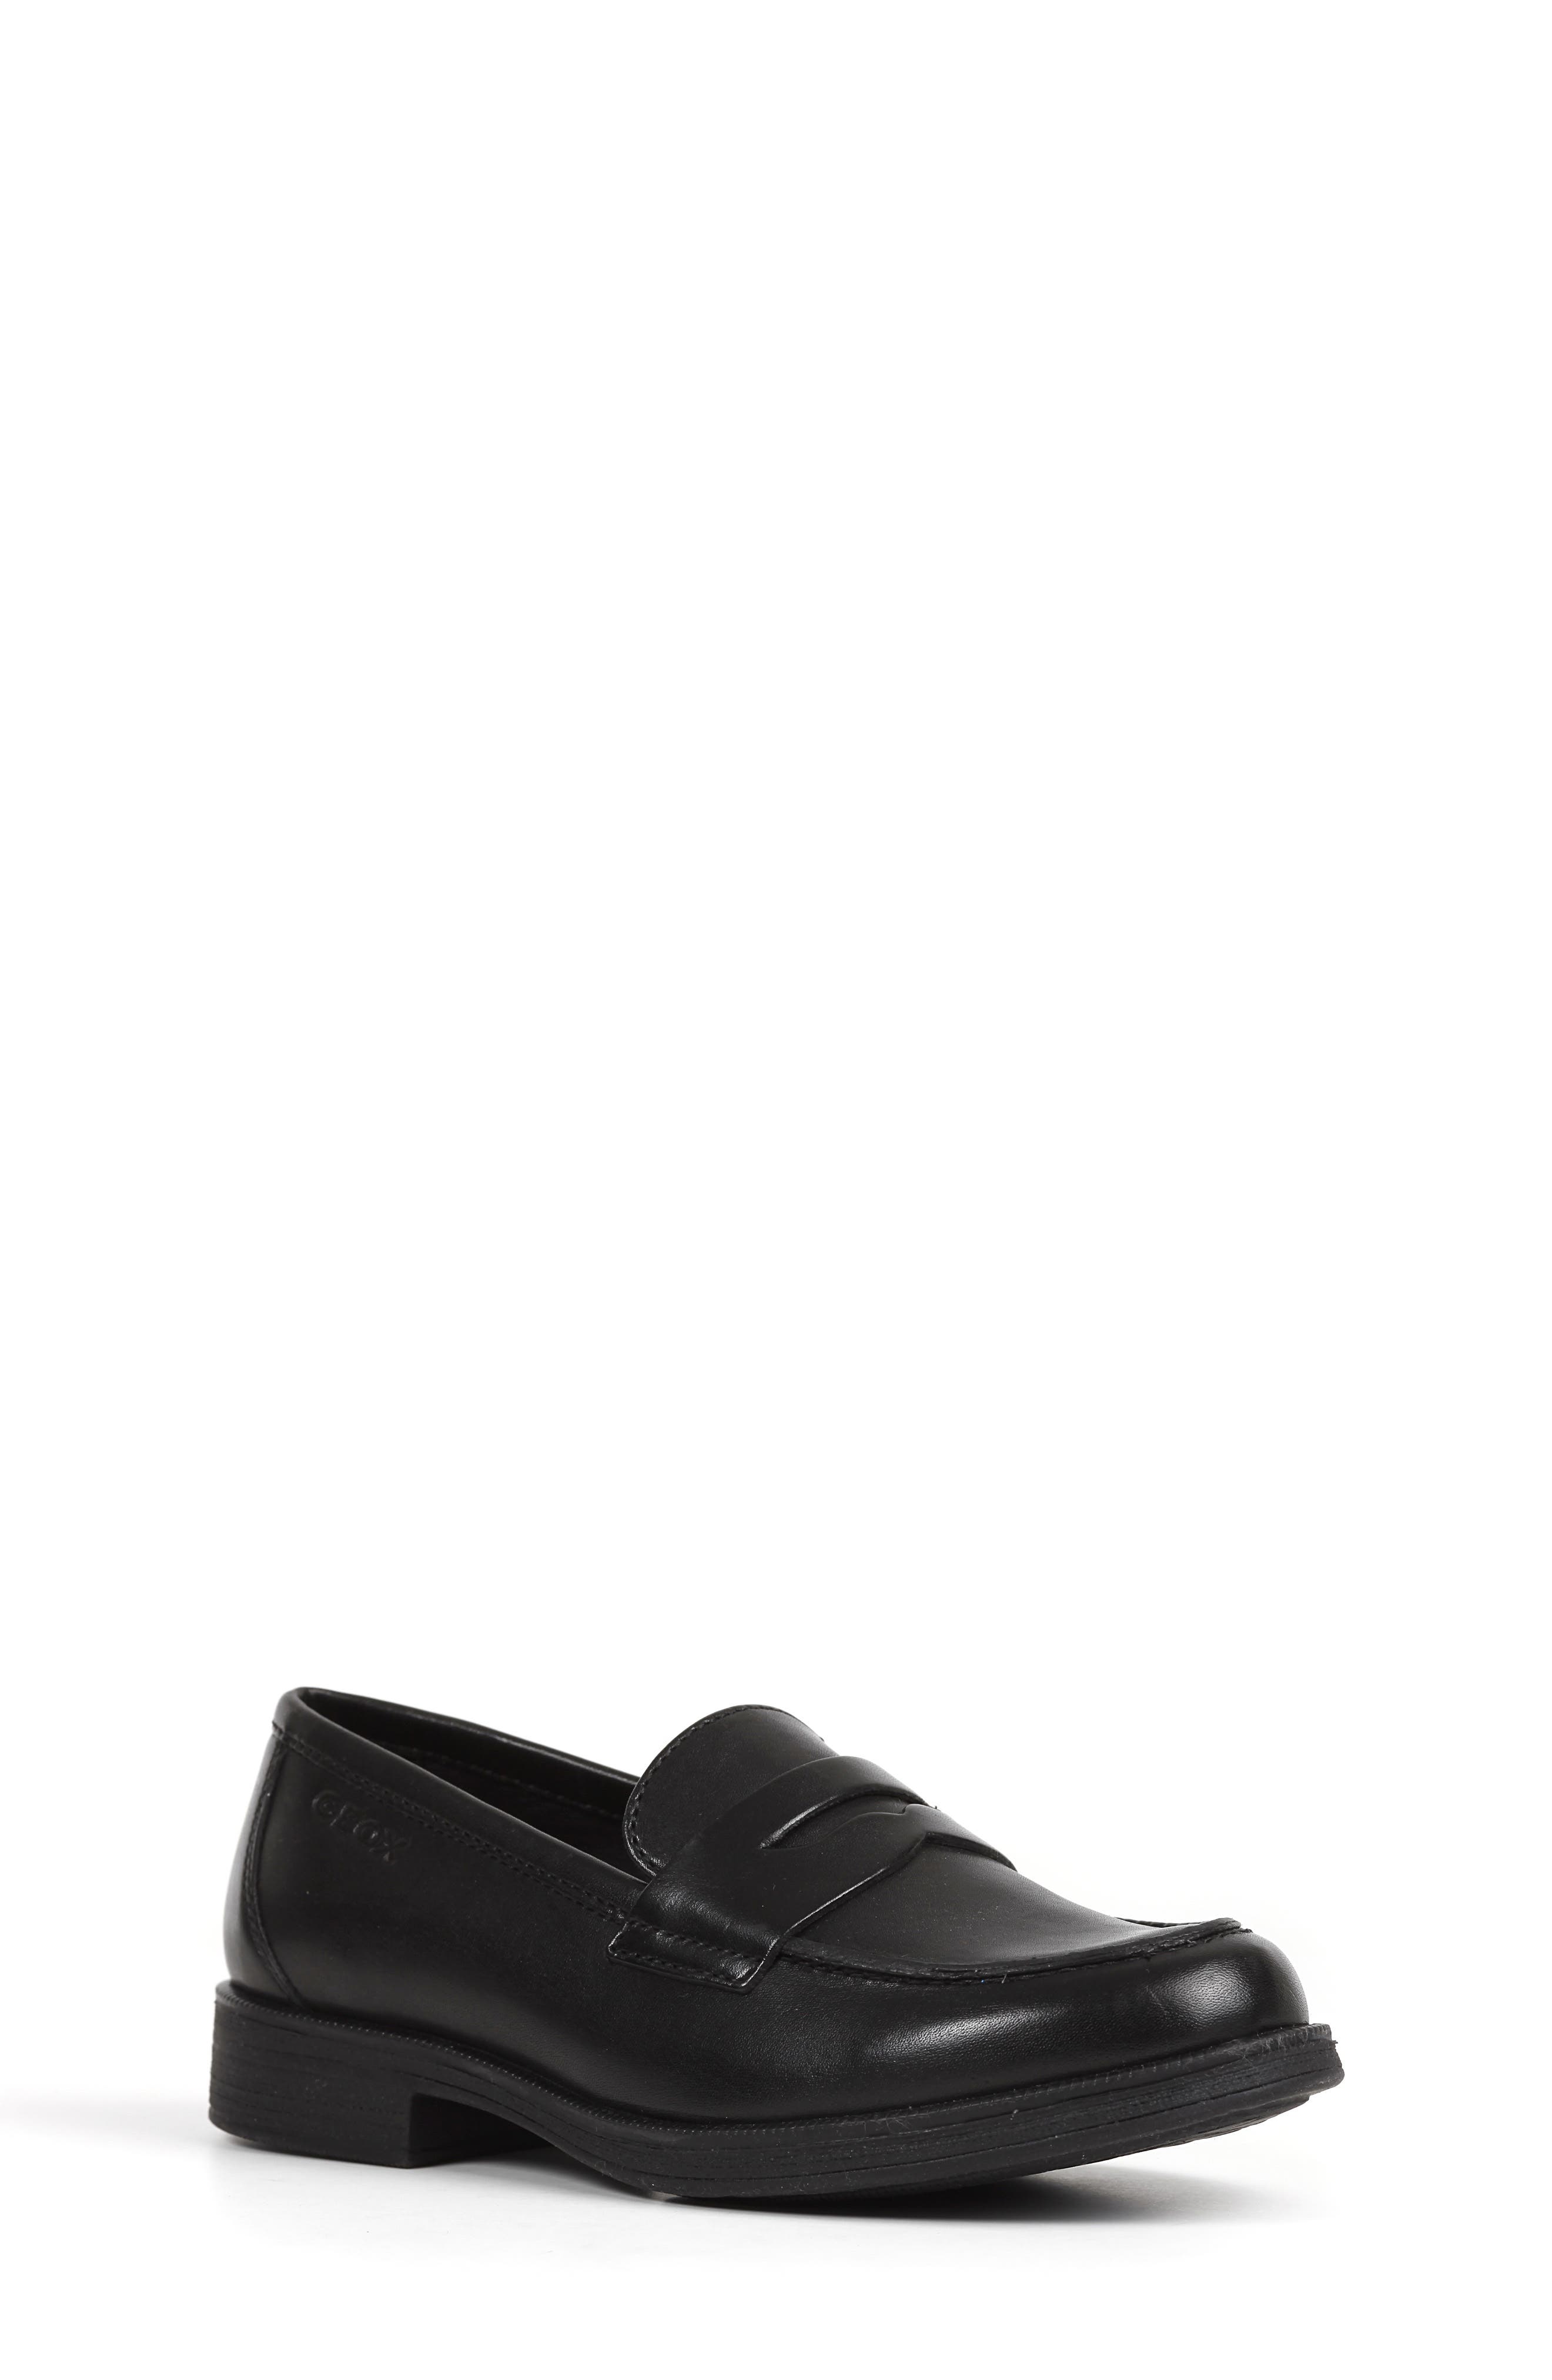 Geox Agata 1 Penny Loafer | Nordstrom